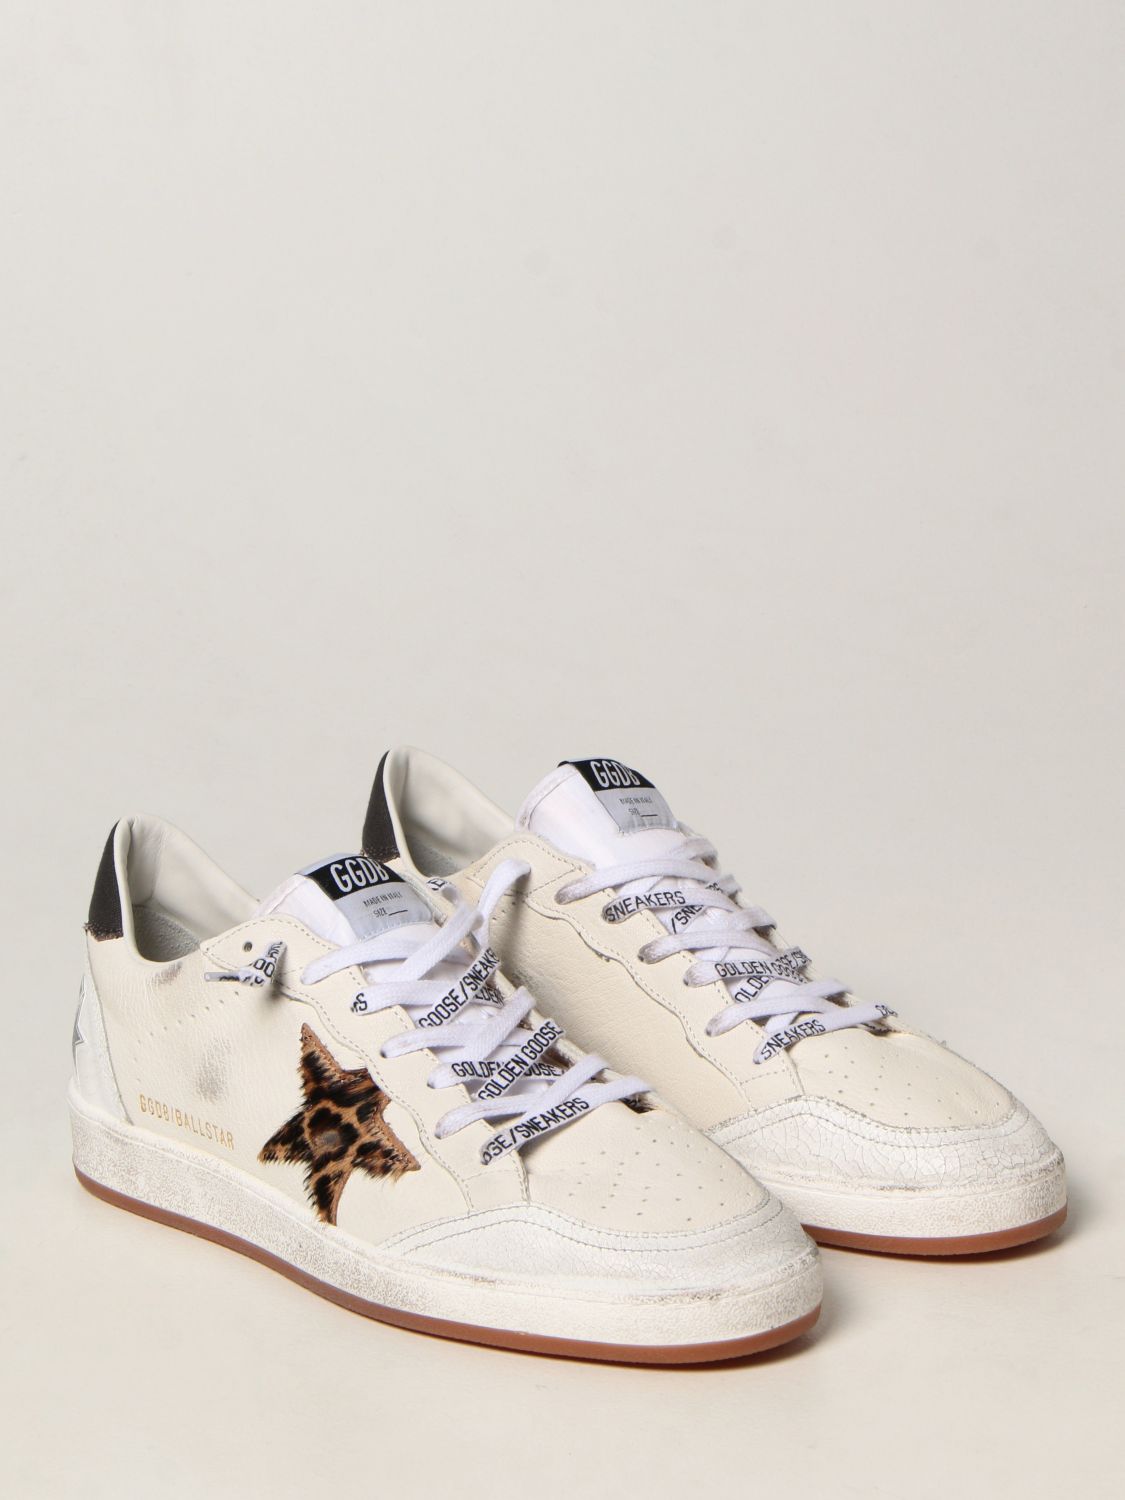 Trainers Golden Goose: Ball Star Golden Goose trainers in worn leather white 2